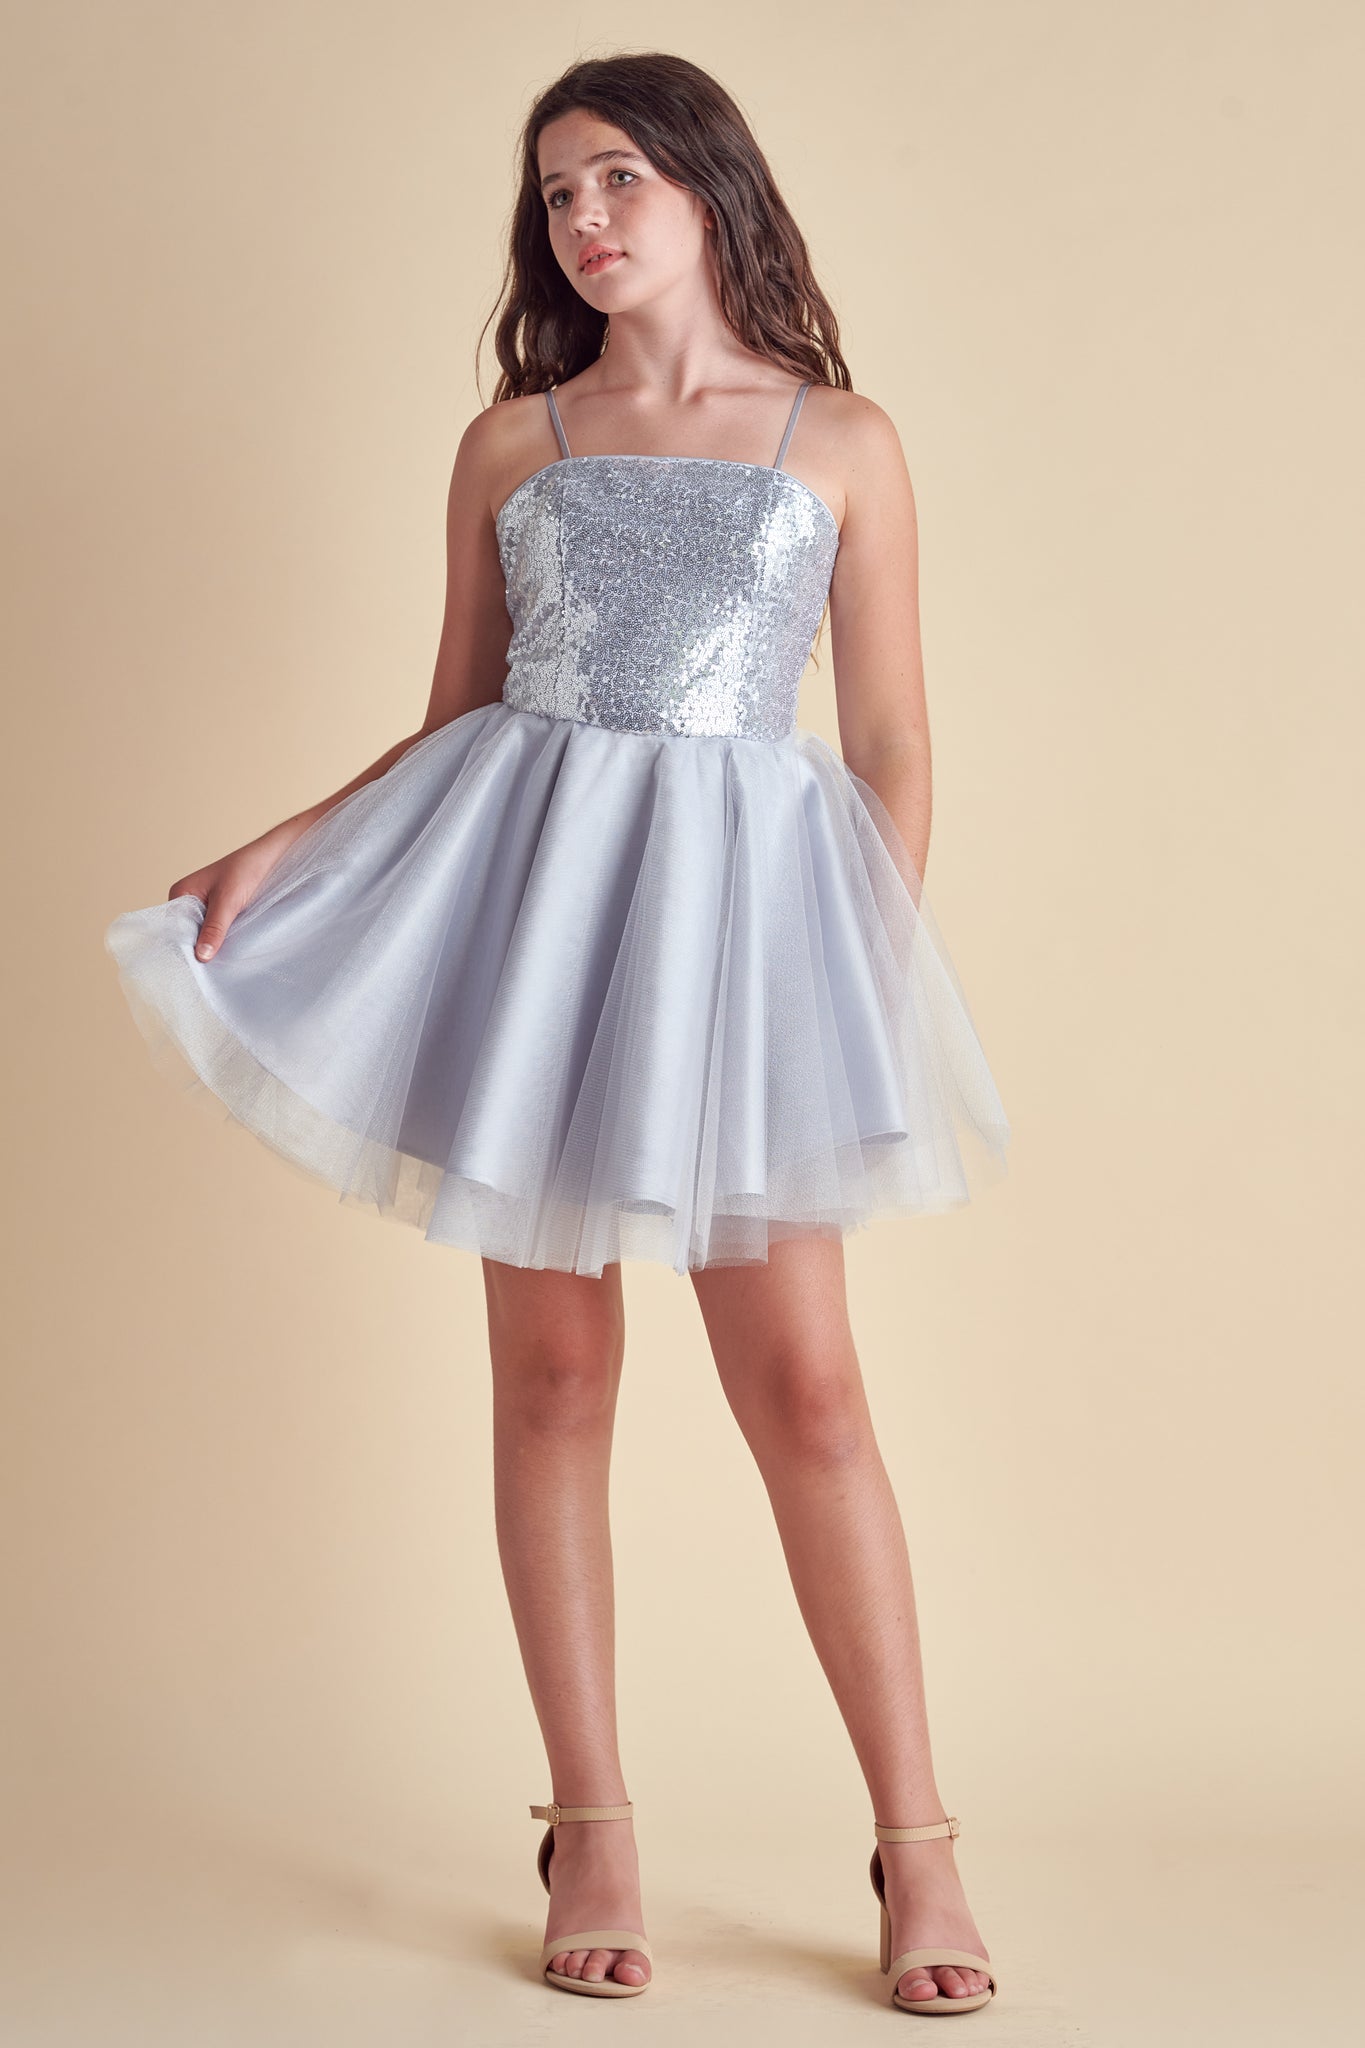 This is sequin bodice dress in silver with full tulle skirt with adjustable straps. Hits above the knee with zipper back detailing. This perfect bat mitzvah dress or party outfit for any girl.